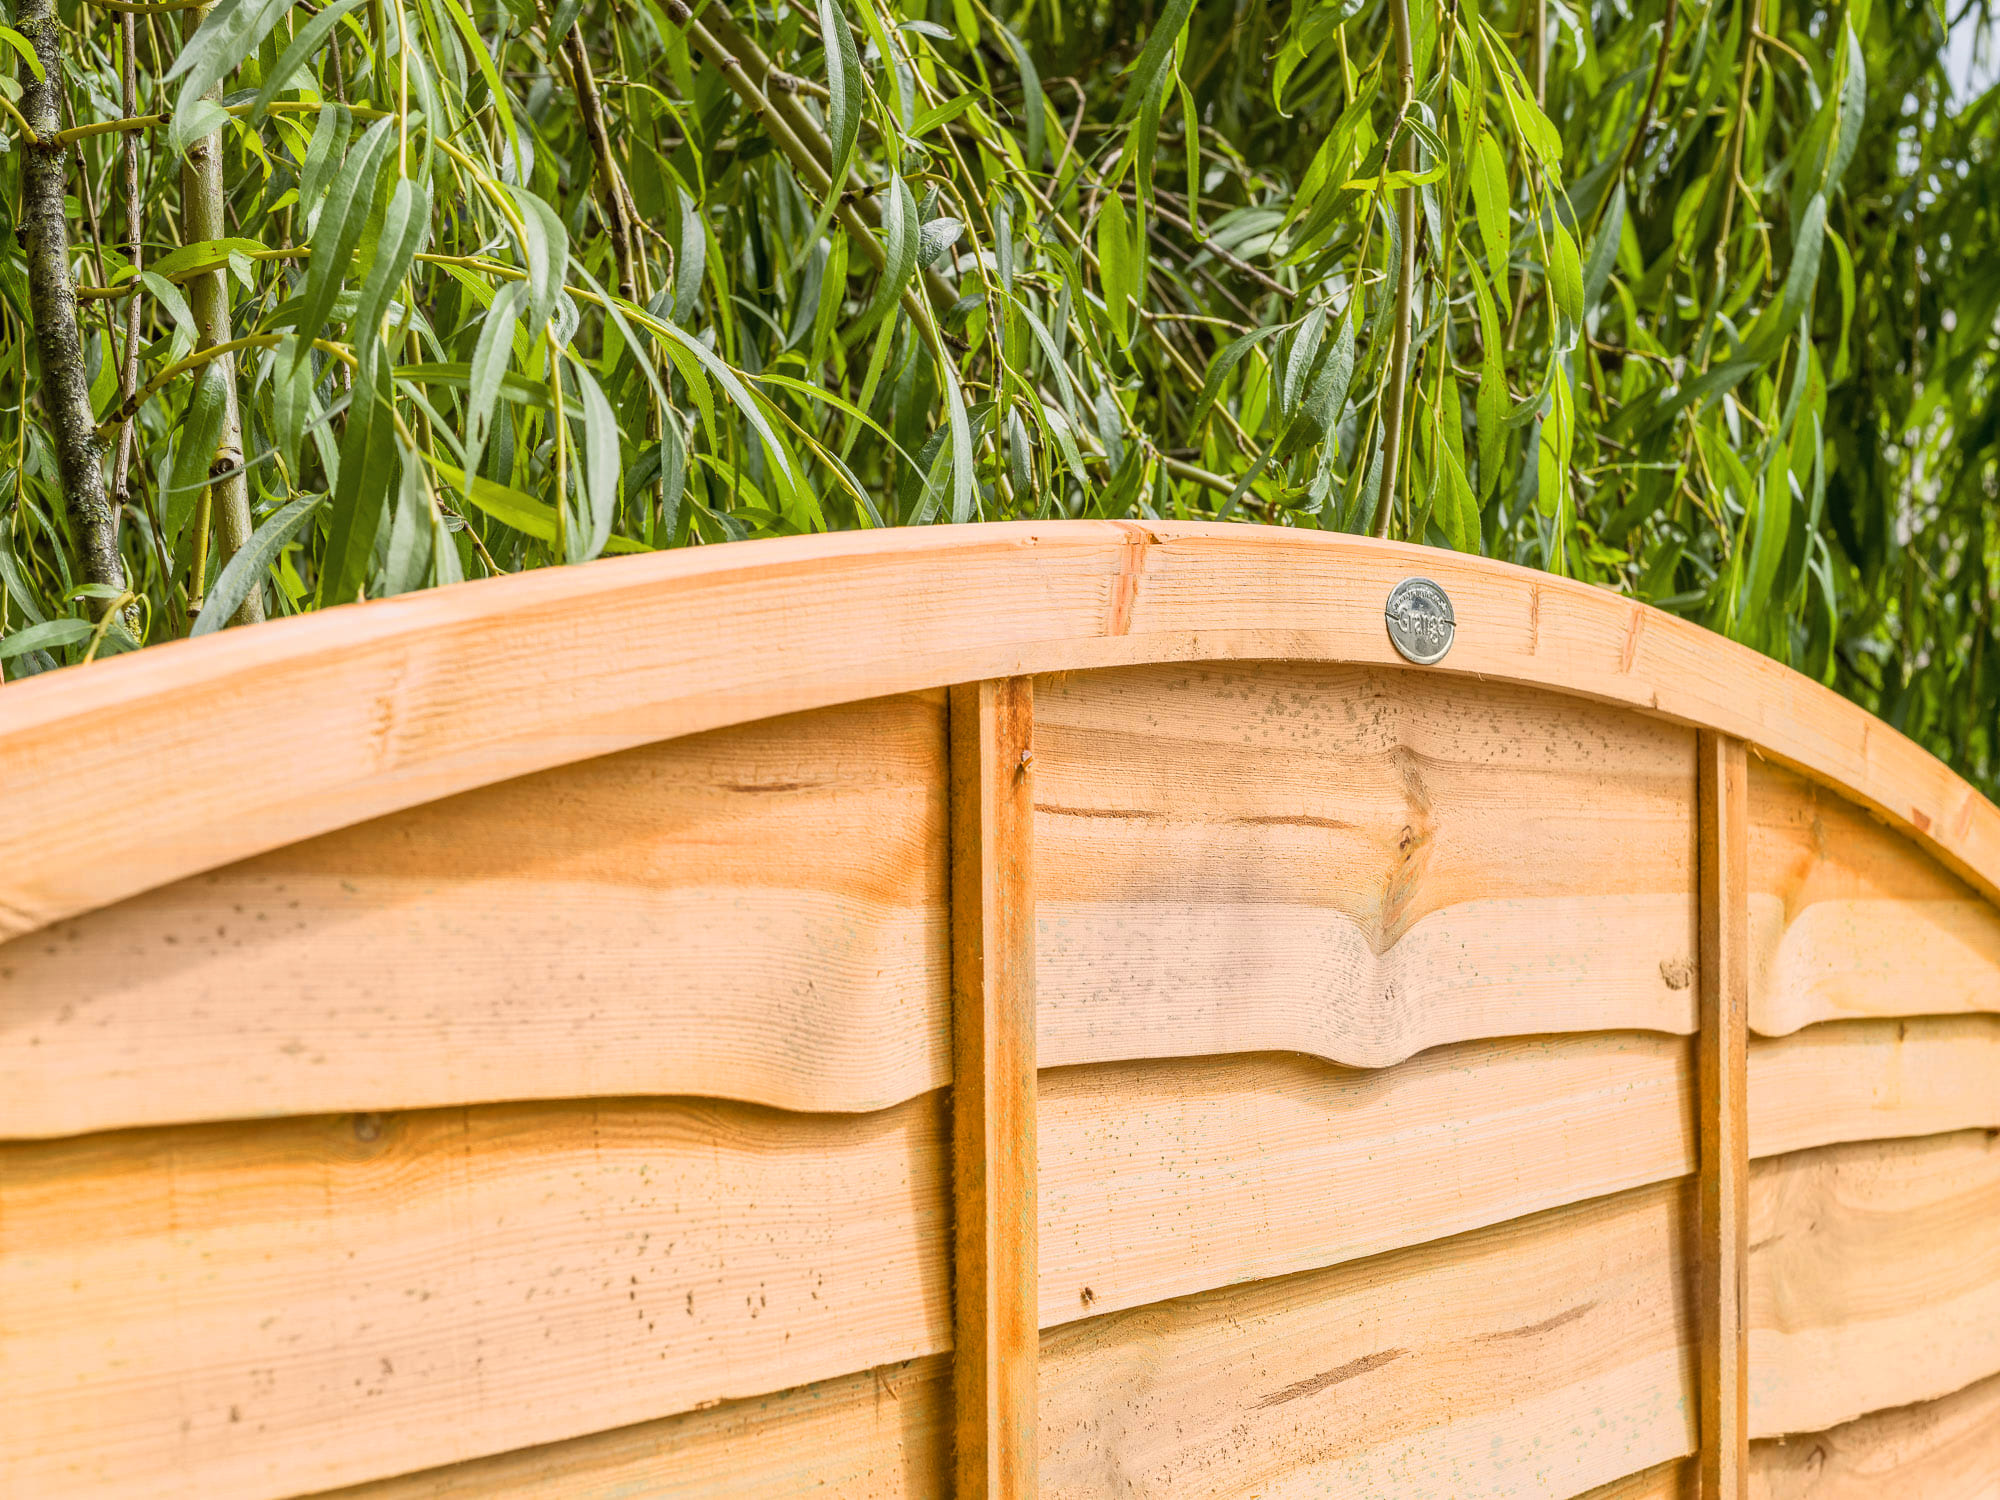 SUPERIOR BOW TOP LAP FENCE PANEL An added twist to a simple design, a stronger lap panel constructed using double waney edge slats that are secured into a neat arched shaped rebated frame.